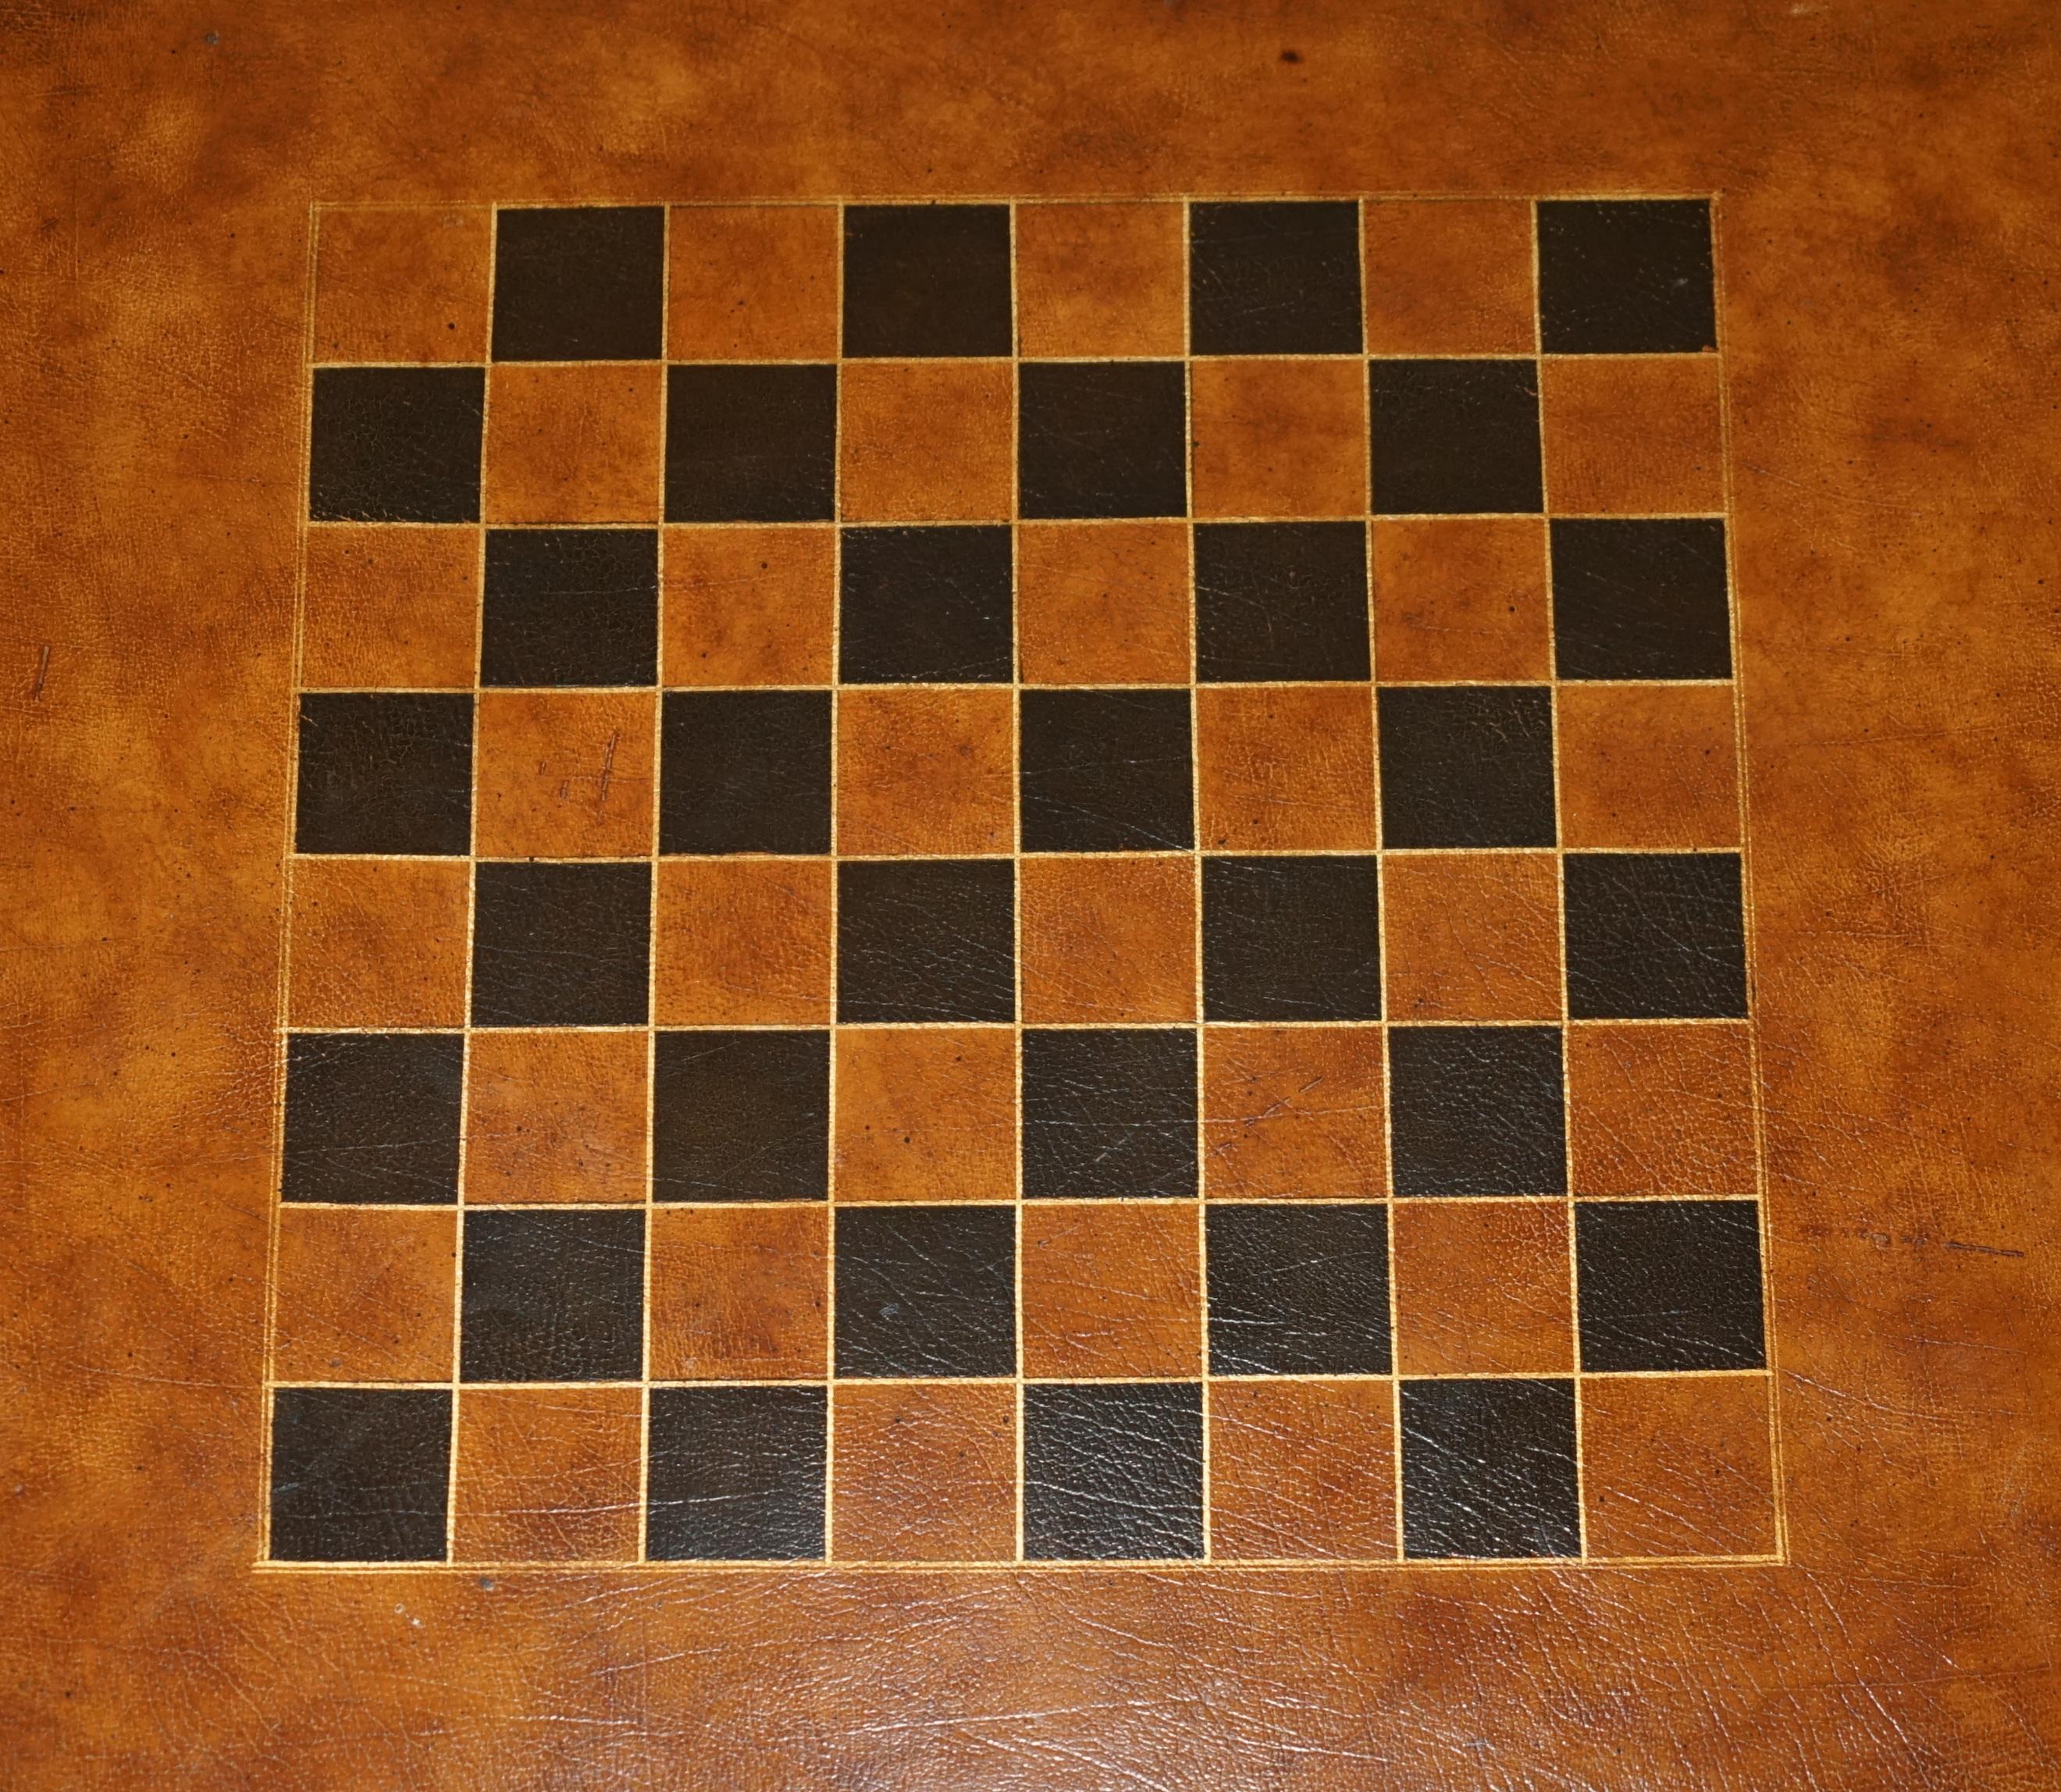 Hand-Crafted STUNNiNG HAND DYED BROWN LEATHER SCHOLARS BOOK CHESSBOARD CHESS COFFEE TABLE For Sale